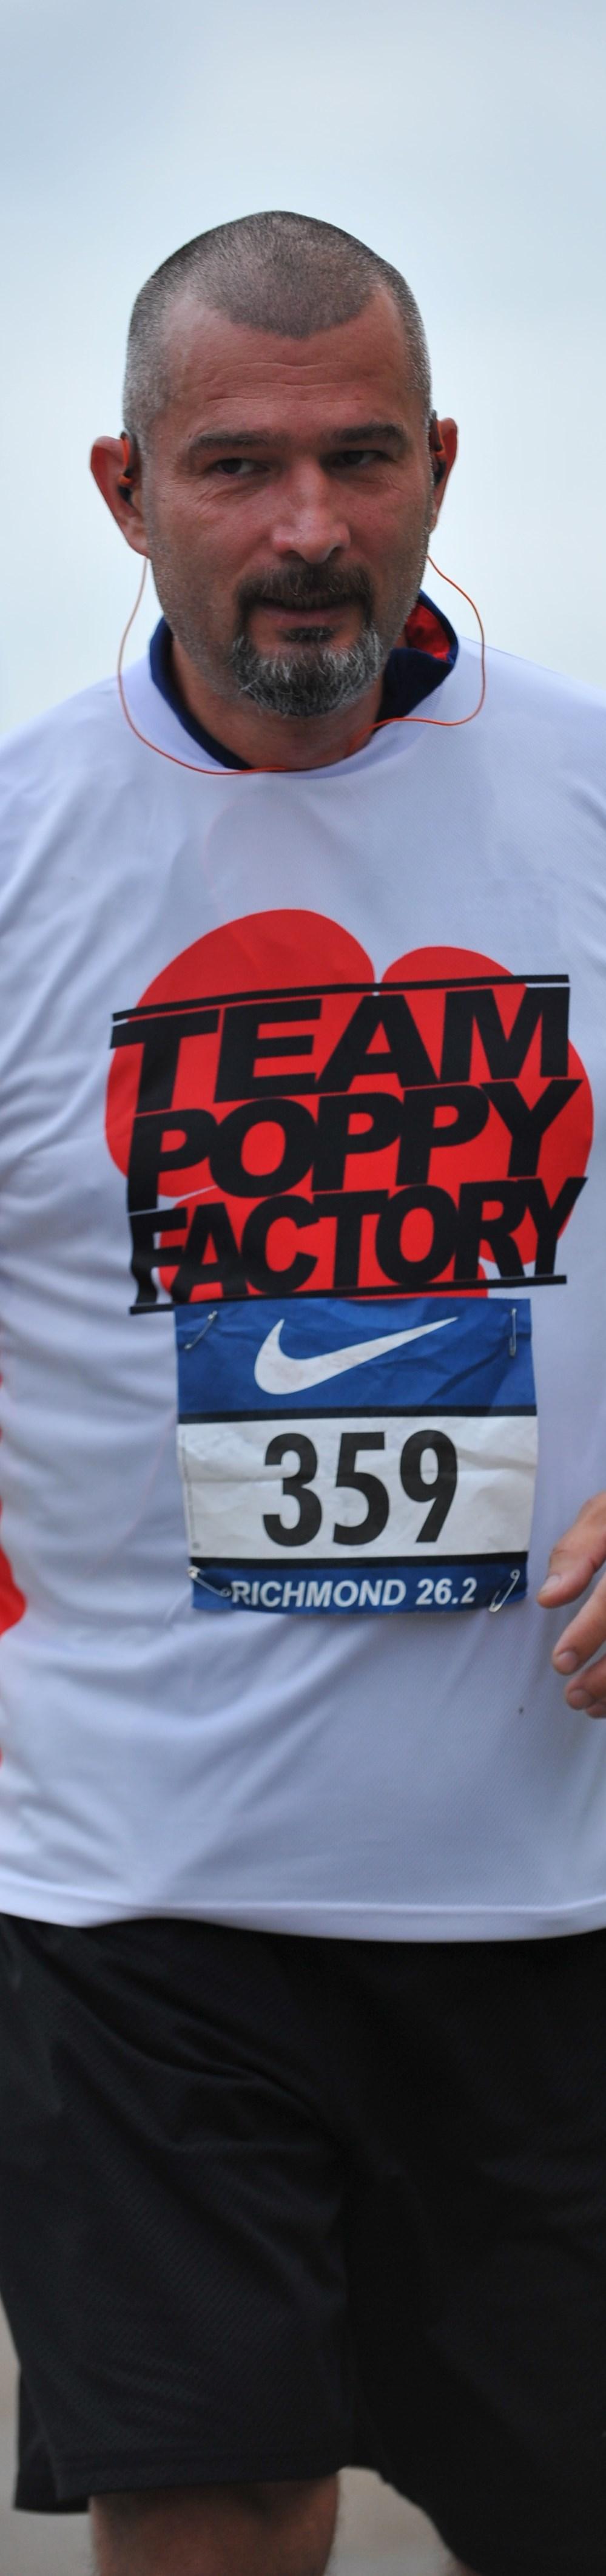 Challenge Cheer points Prudential RideLondon-Surrey 100 Richmond Park 30 July 2017 As well volunteering on the water station, you can help motivate the Team Poppy Factory cyclists as they ride 100